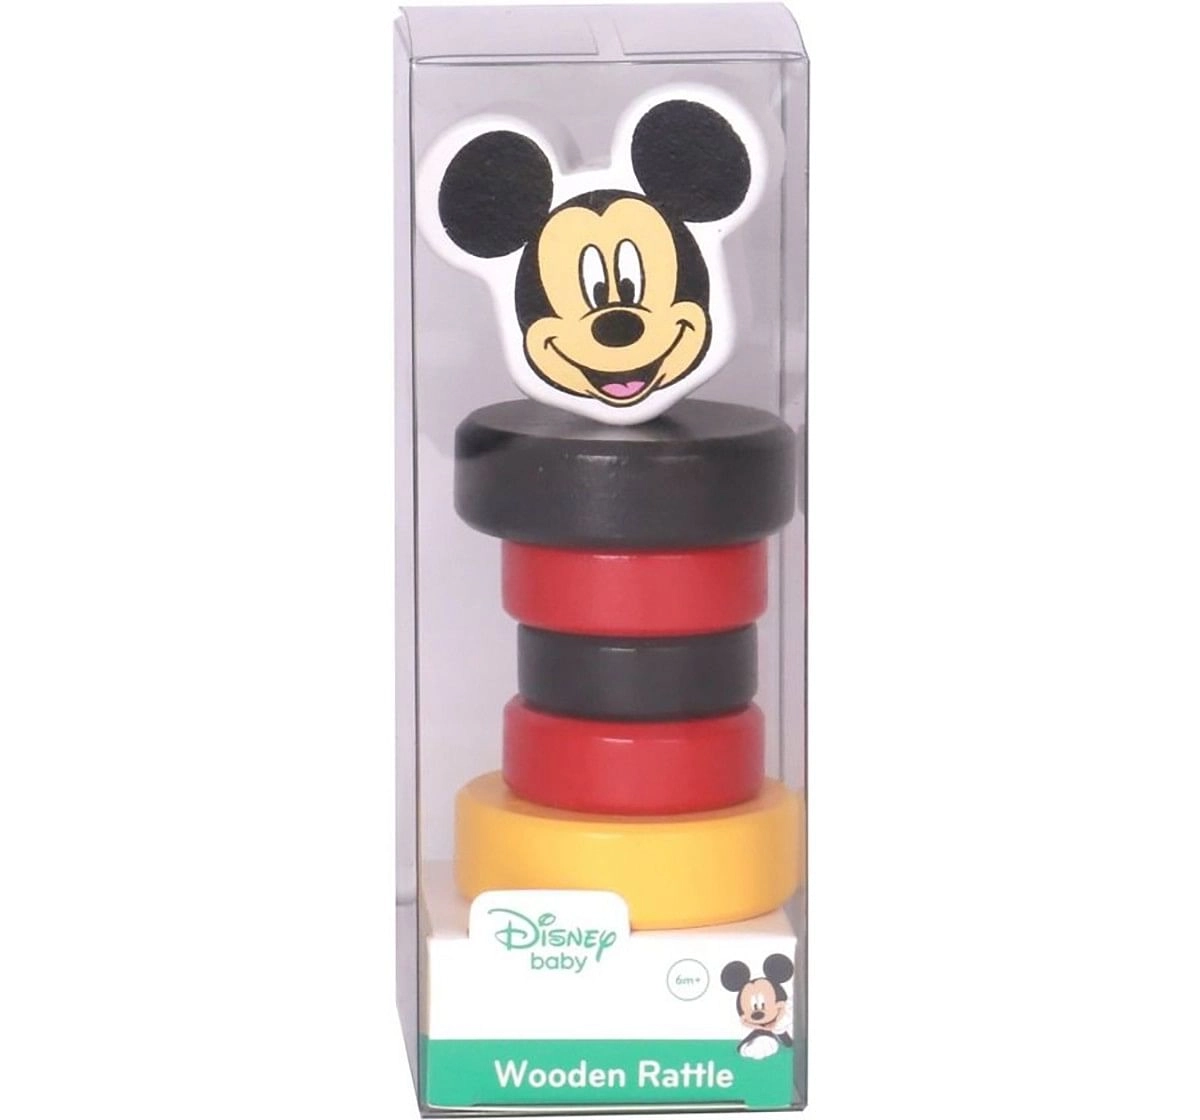 Disney Mickey Wooden Rattle for New Born Kids age 6M+ 